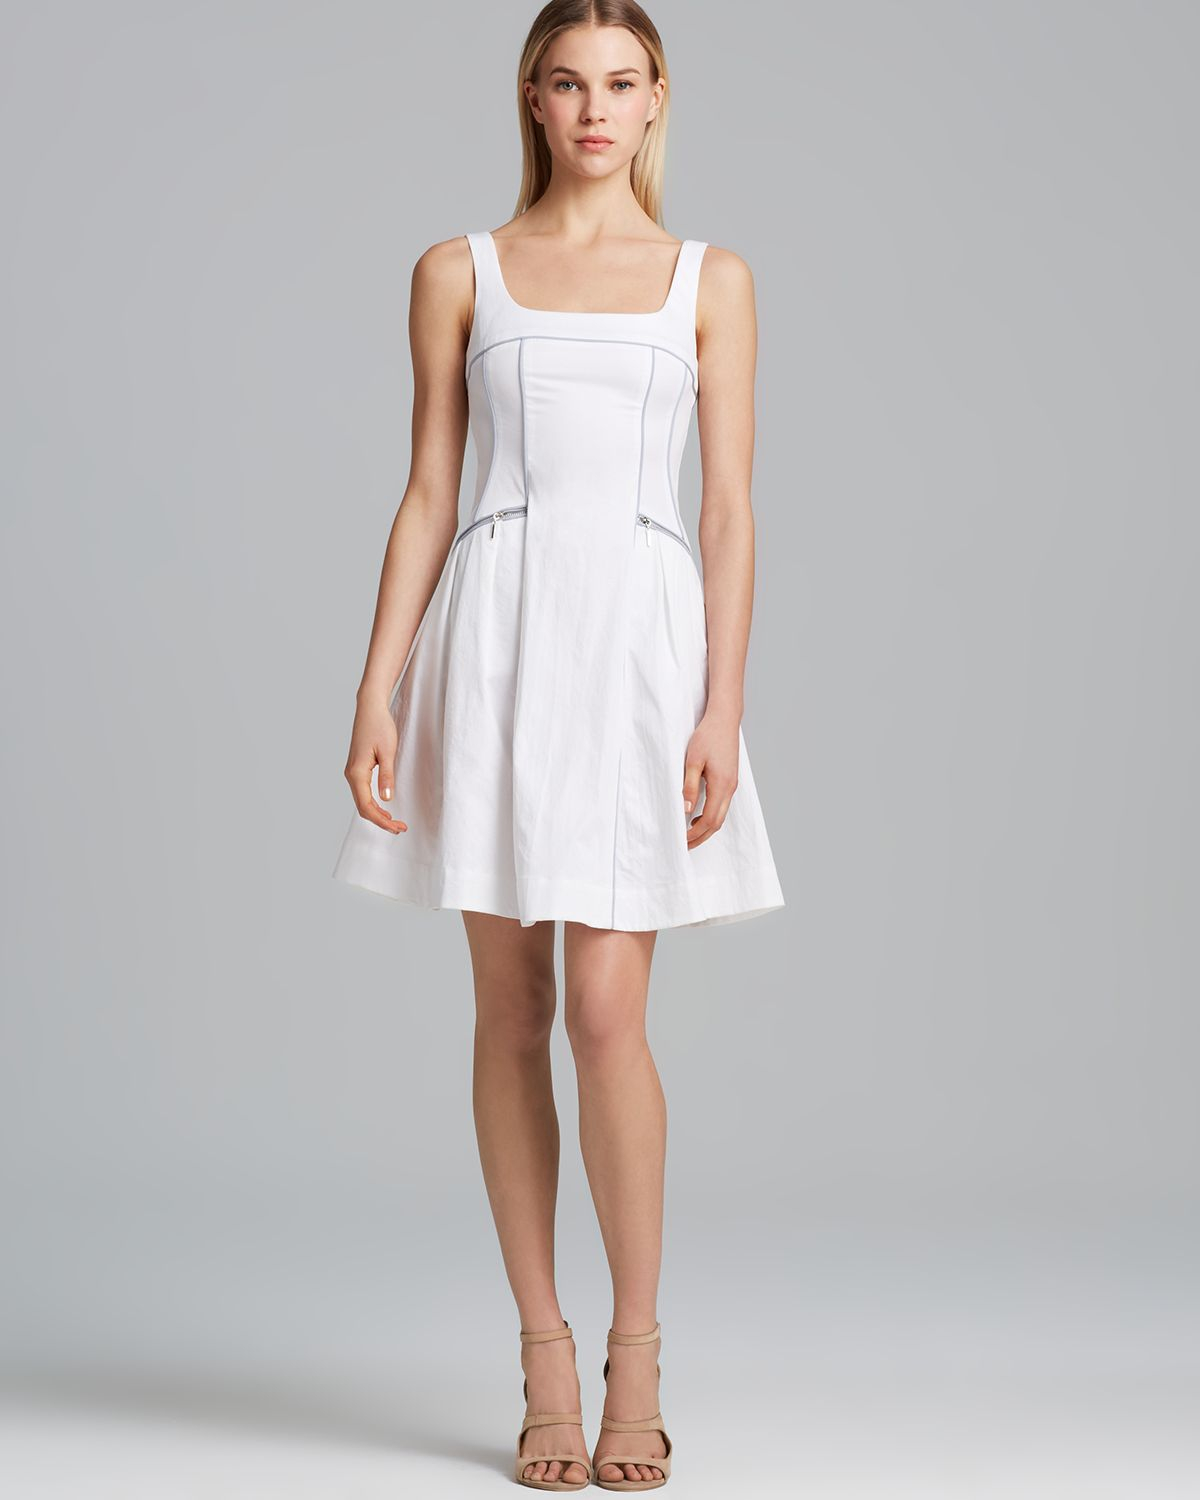 Nanette Lepore Dress - Spring Party in White - Lyst